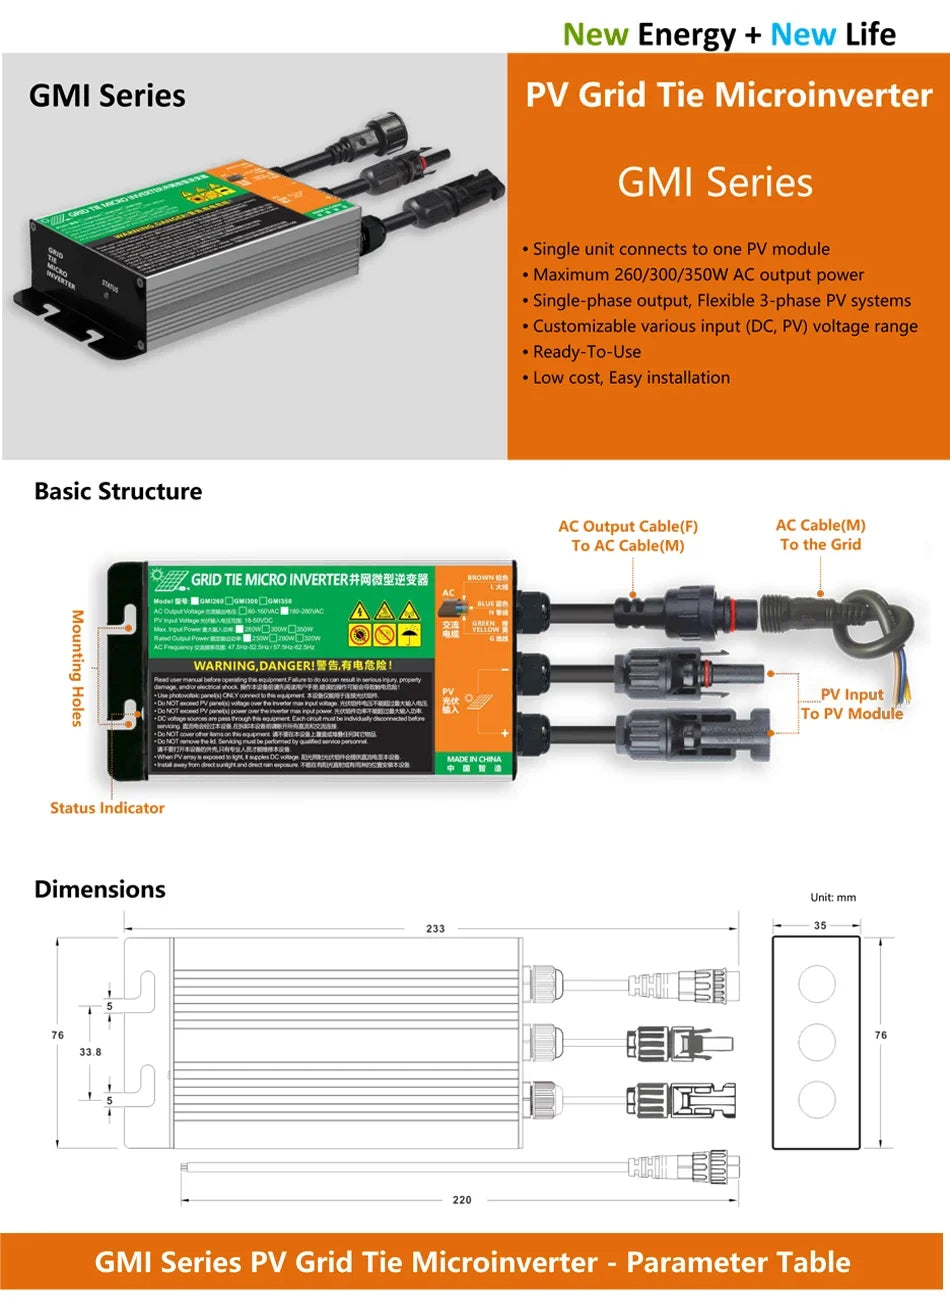 GMI Series solar grid tie micro inverter with MPPT and output voltage range.